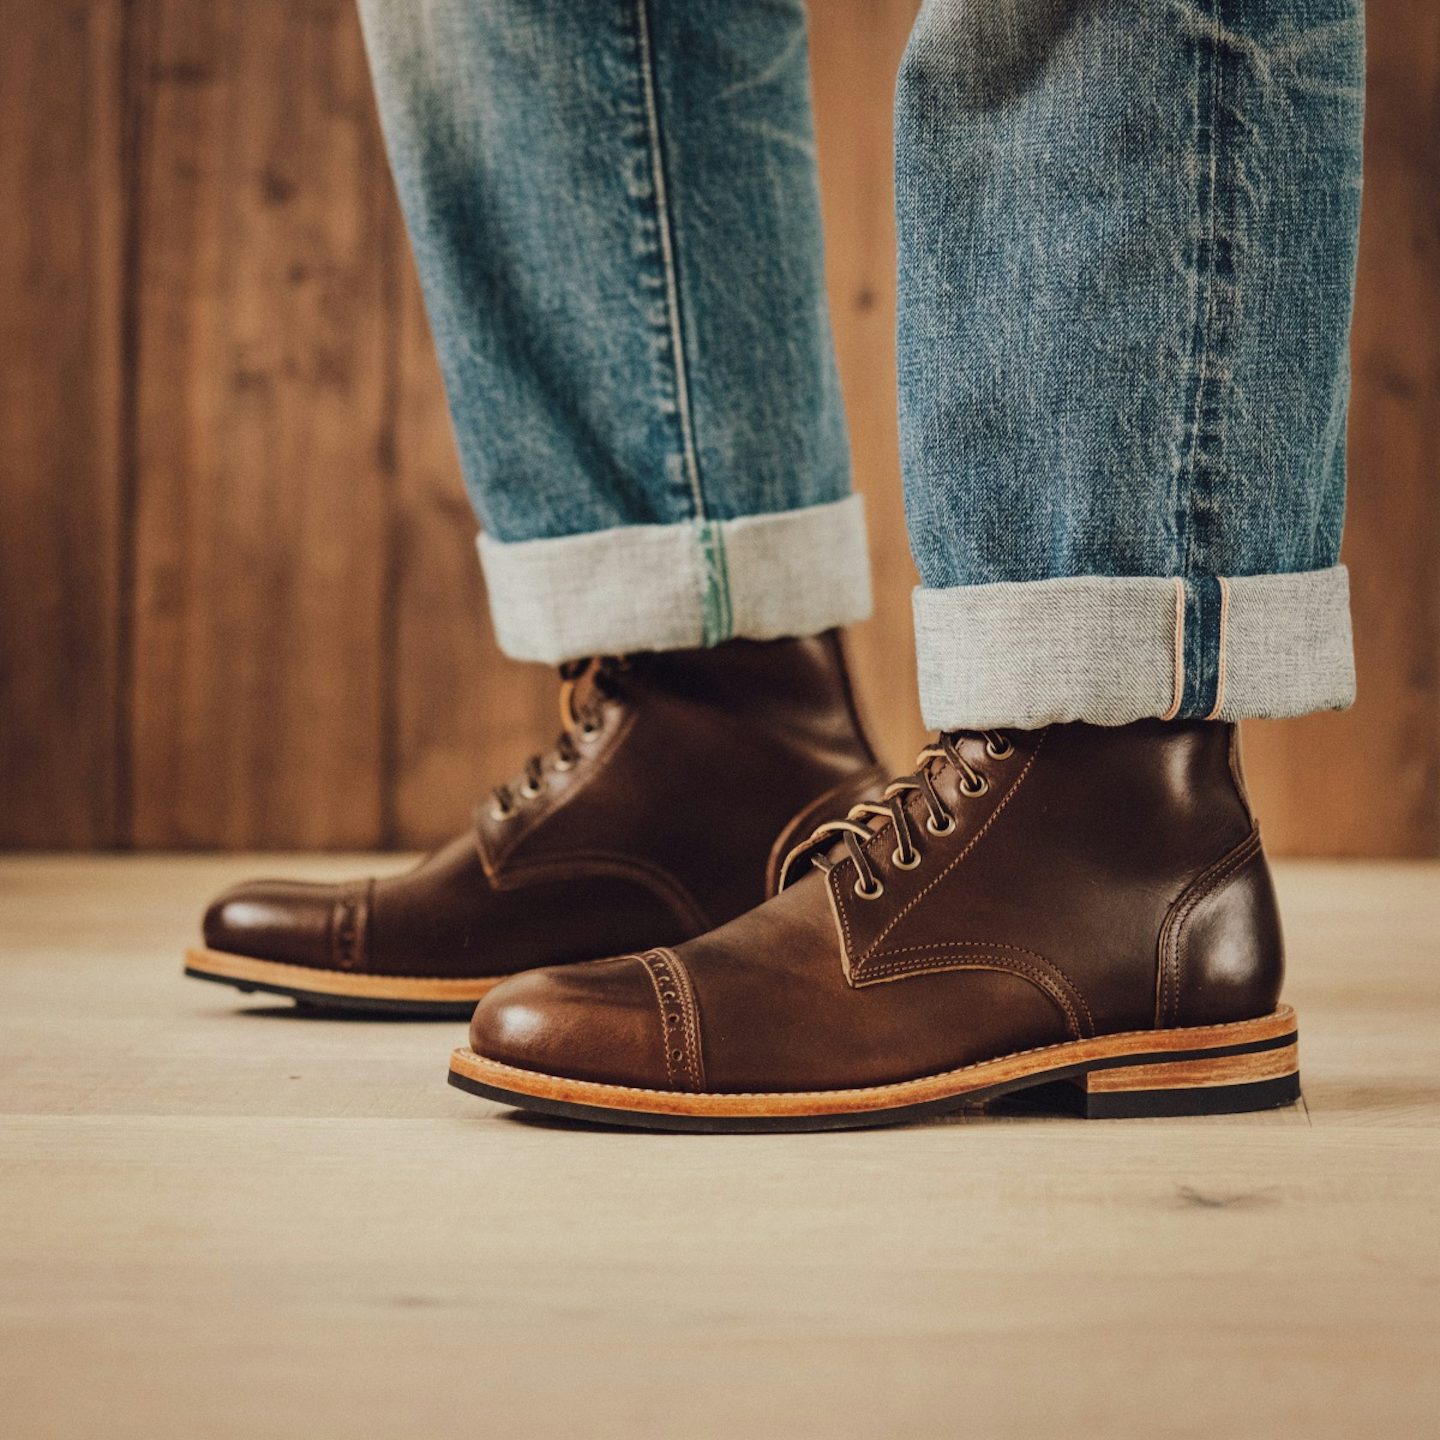 Cap-Toe Trench Boot - Brown Chromexcel, Dainite Sole - Made in USA